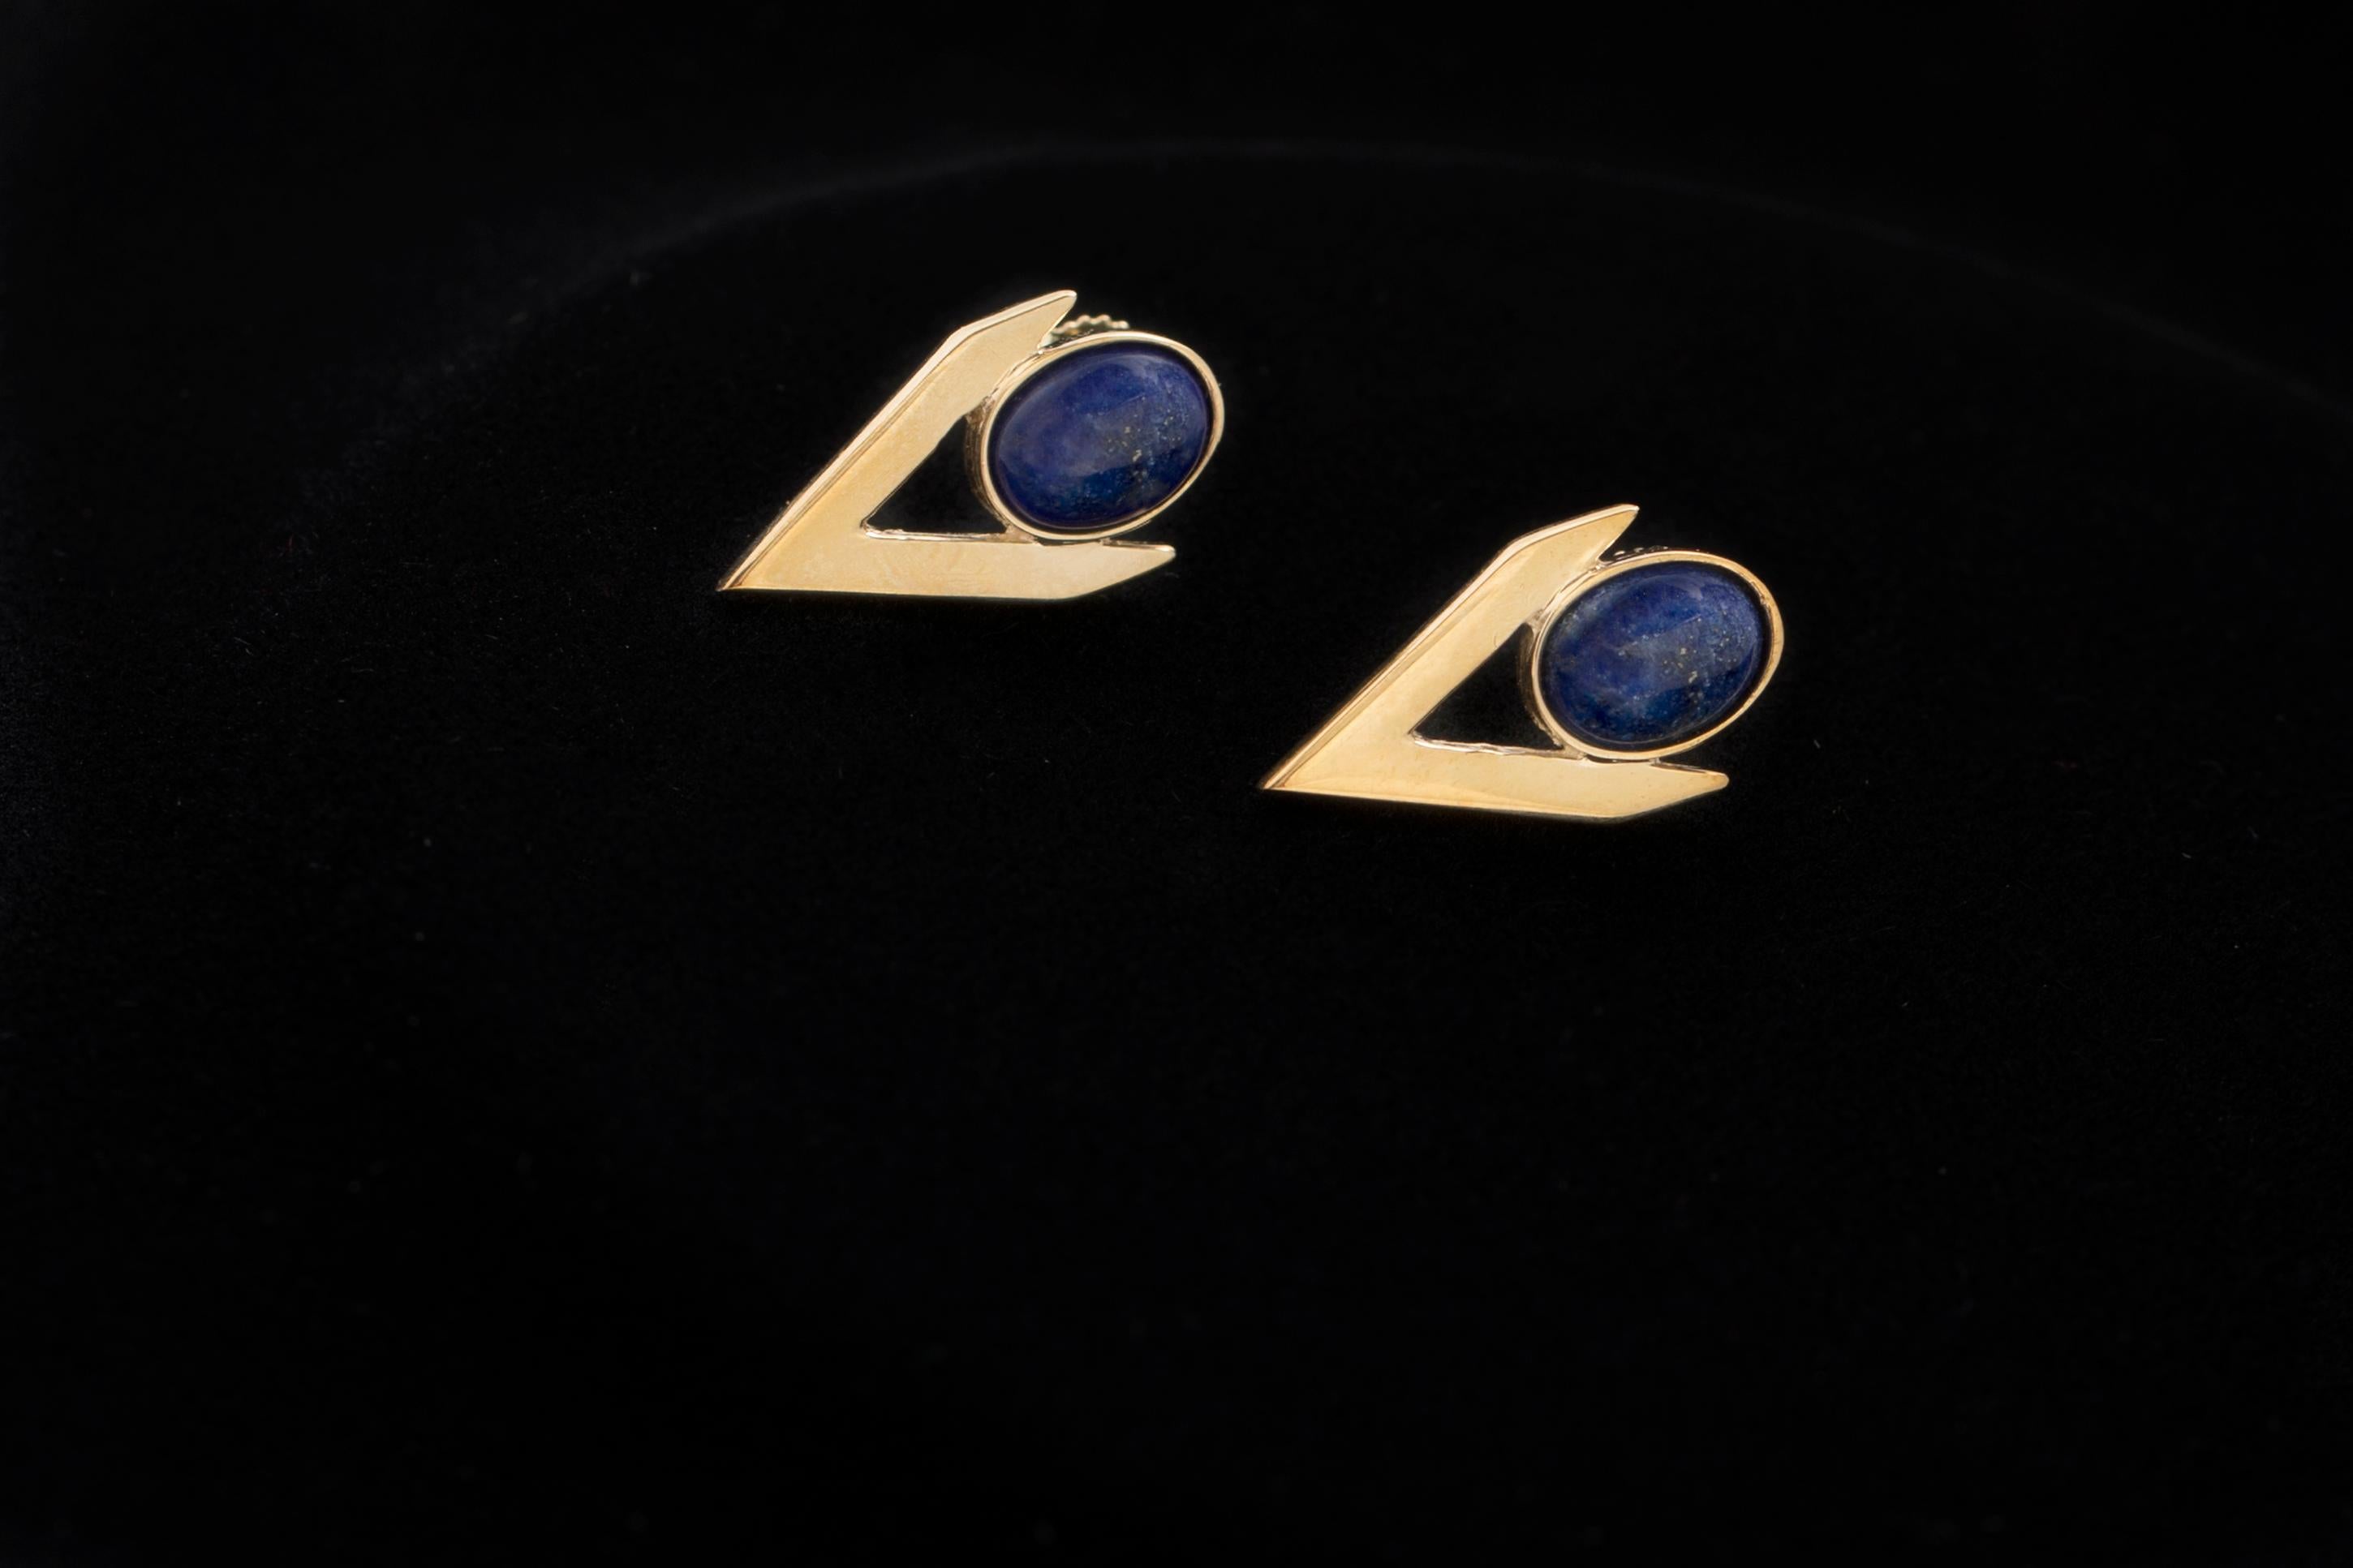 Lapis Lazuli Cabochon Earring Pair in 9 Carat Gold from Iosselliani In New Condition For Sale In Rome, IT